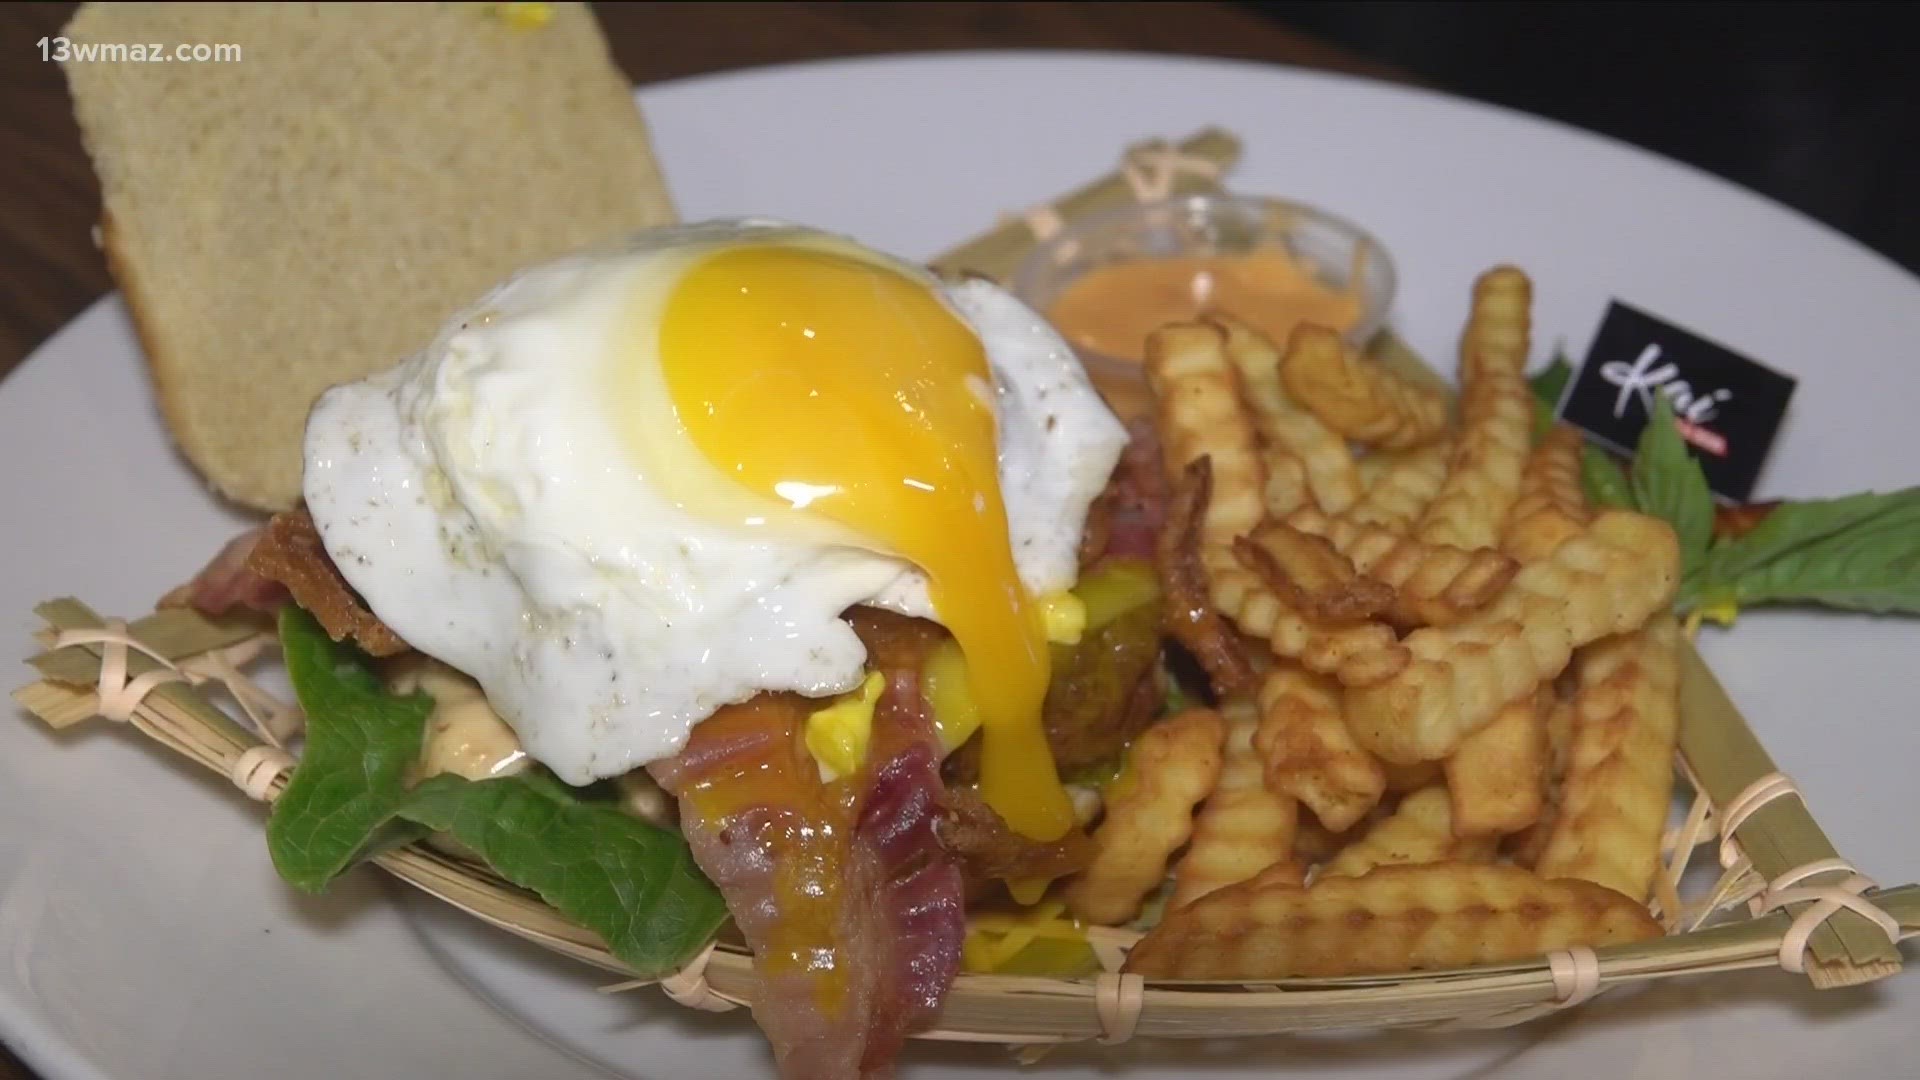 It features a steak patty with lettuce, pepper jack cheese, bacon, fried onion strings, and a fried egg.